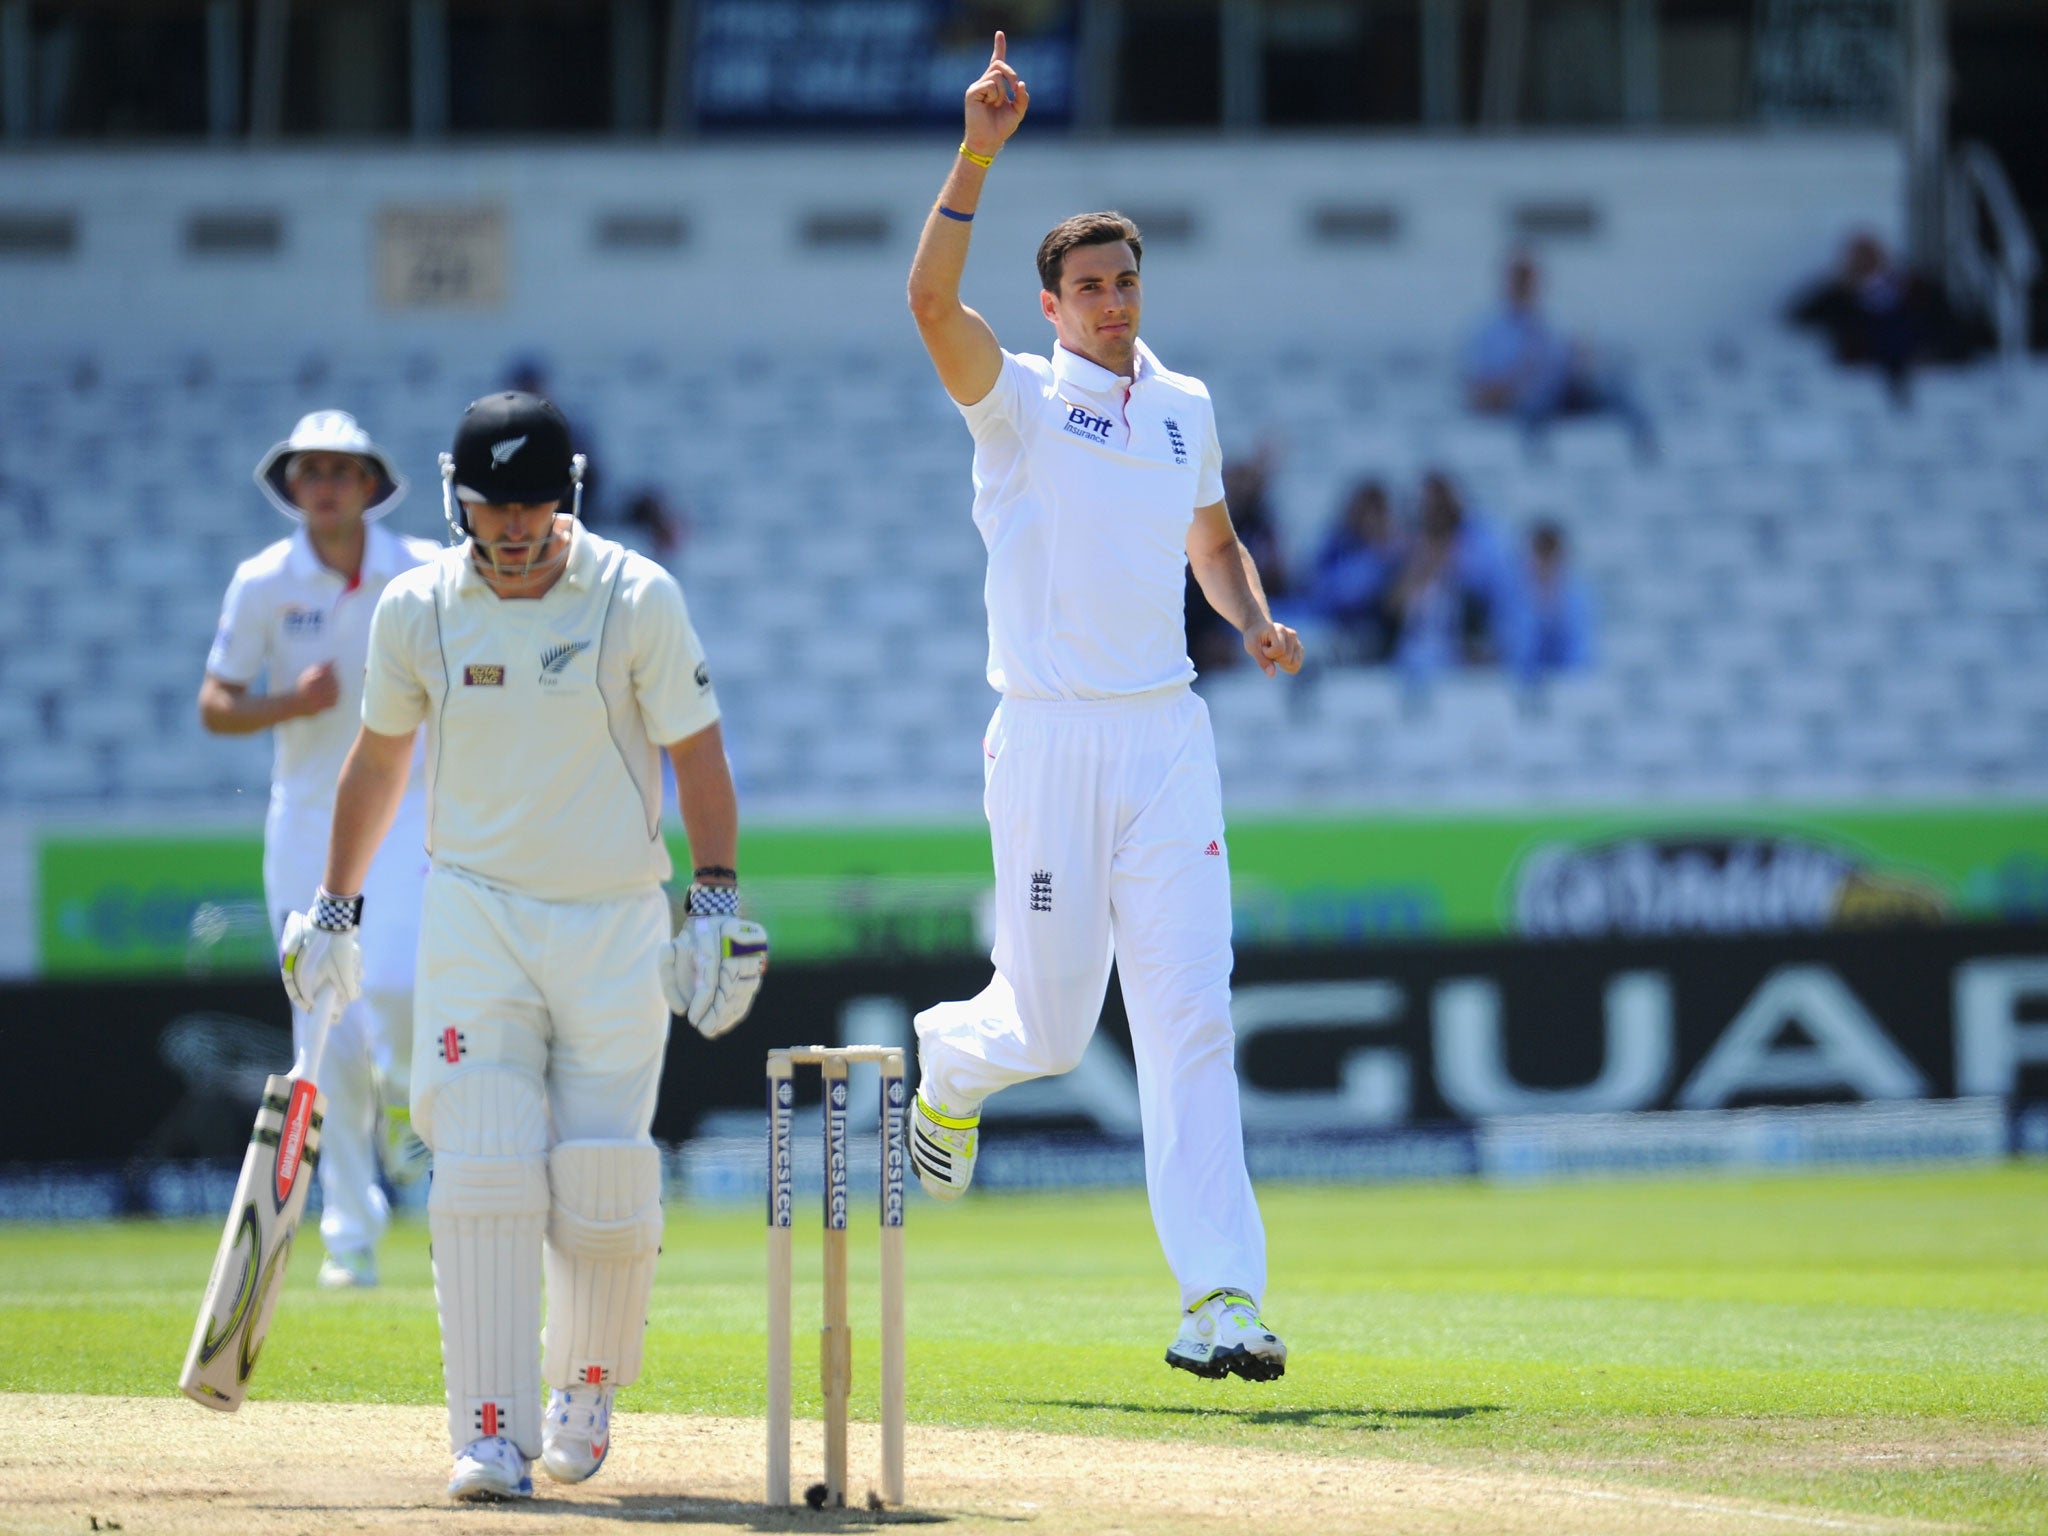 England bowler Steven Finn celebrates after taking the wicket of Hamish Rutherford